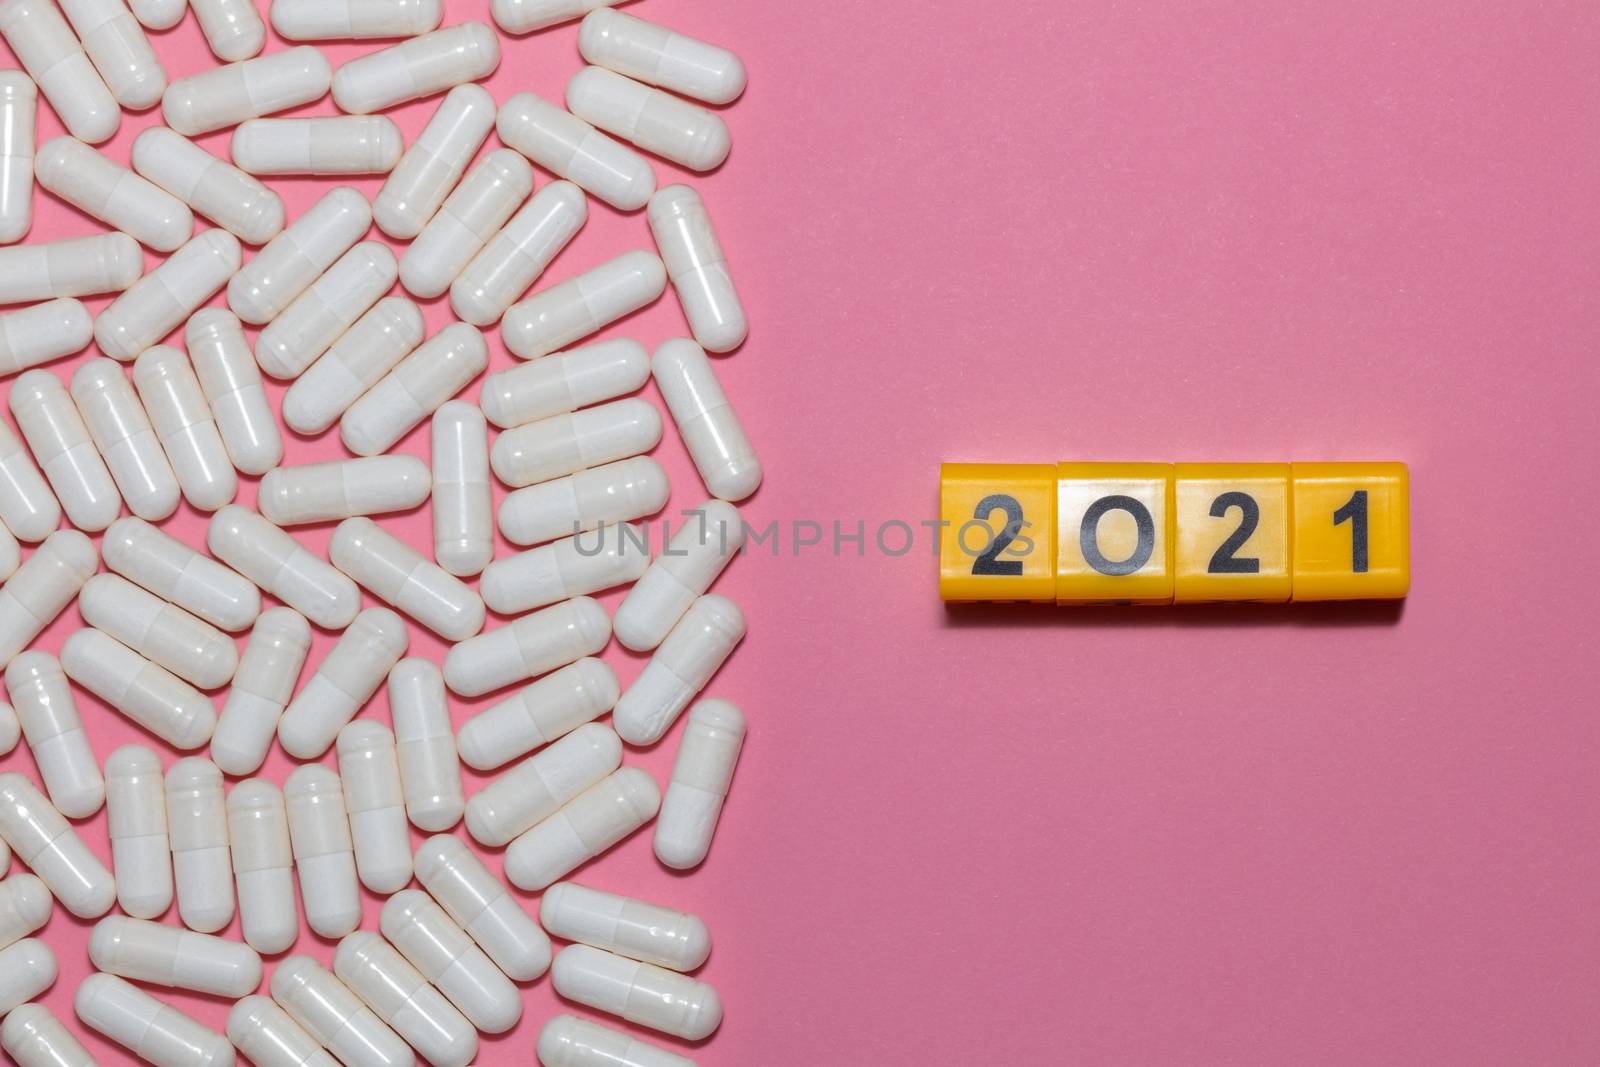 Top view of white pills on pink background with copy space. Yellow cubes with black digits form 2021 next to the pills. Healthcare, medical and pharmaceutical concept. New normal and reality concept. by DamantisZ